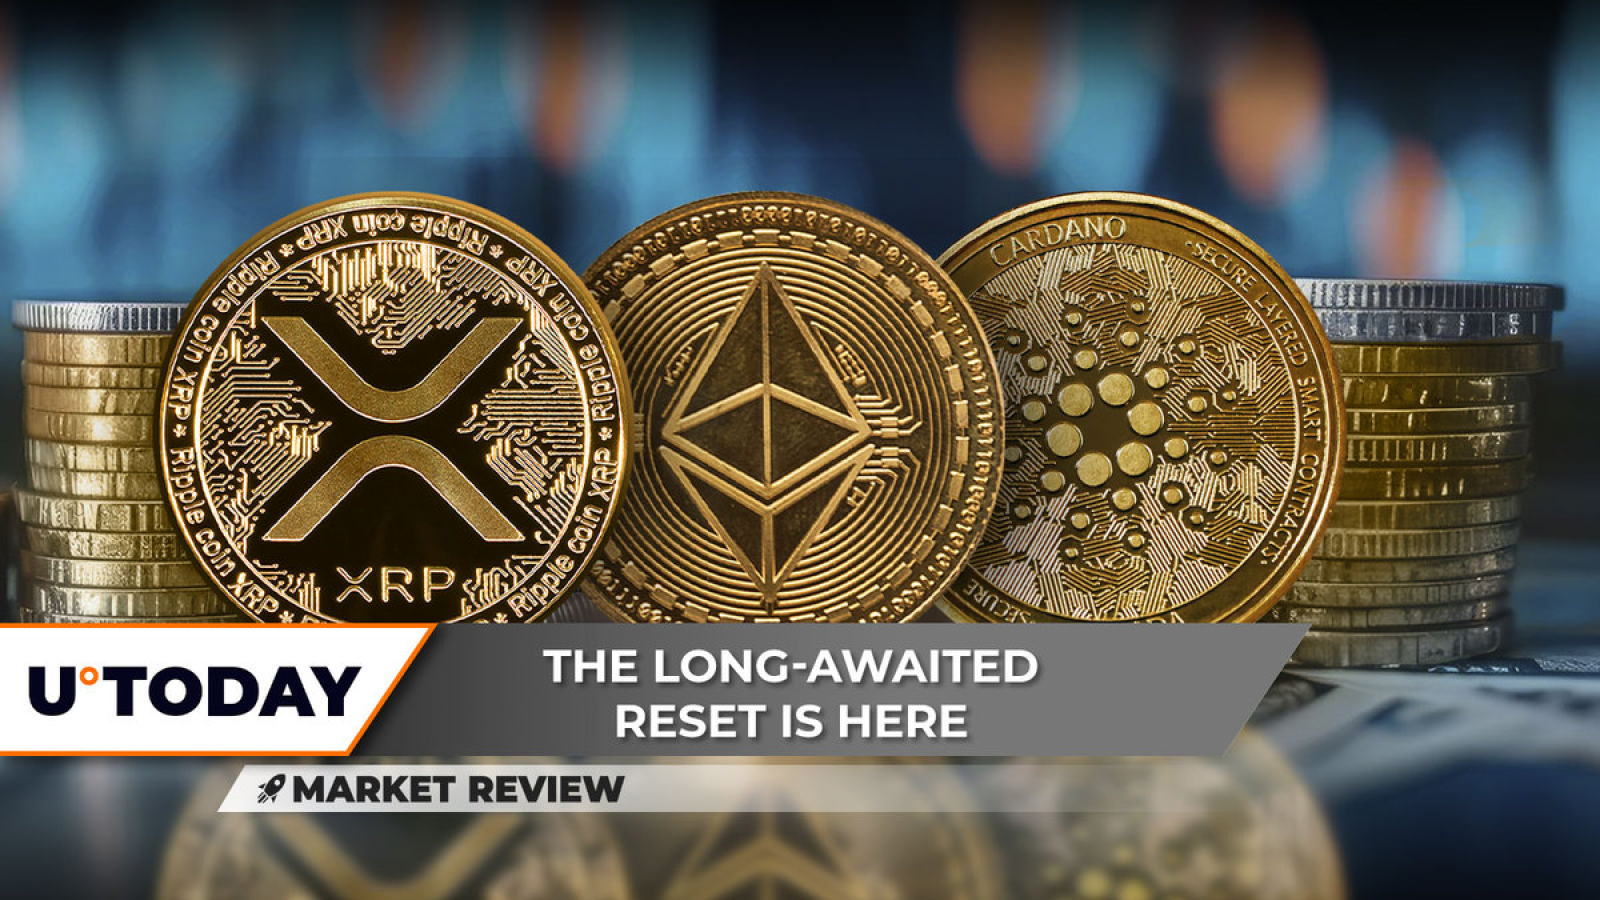 Will XRP Reversal Start After Volume ‘Reset?’ Ethereum (ETH) in Awful State, Cardano (ADA) Hits Gas Pedal at $0.45